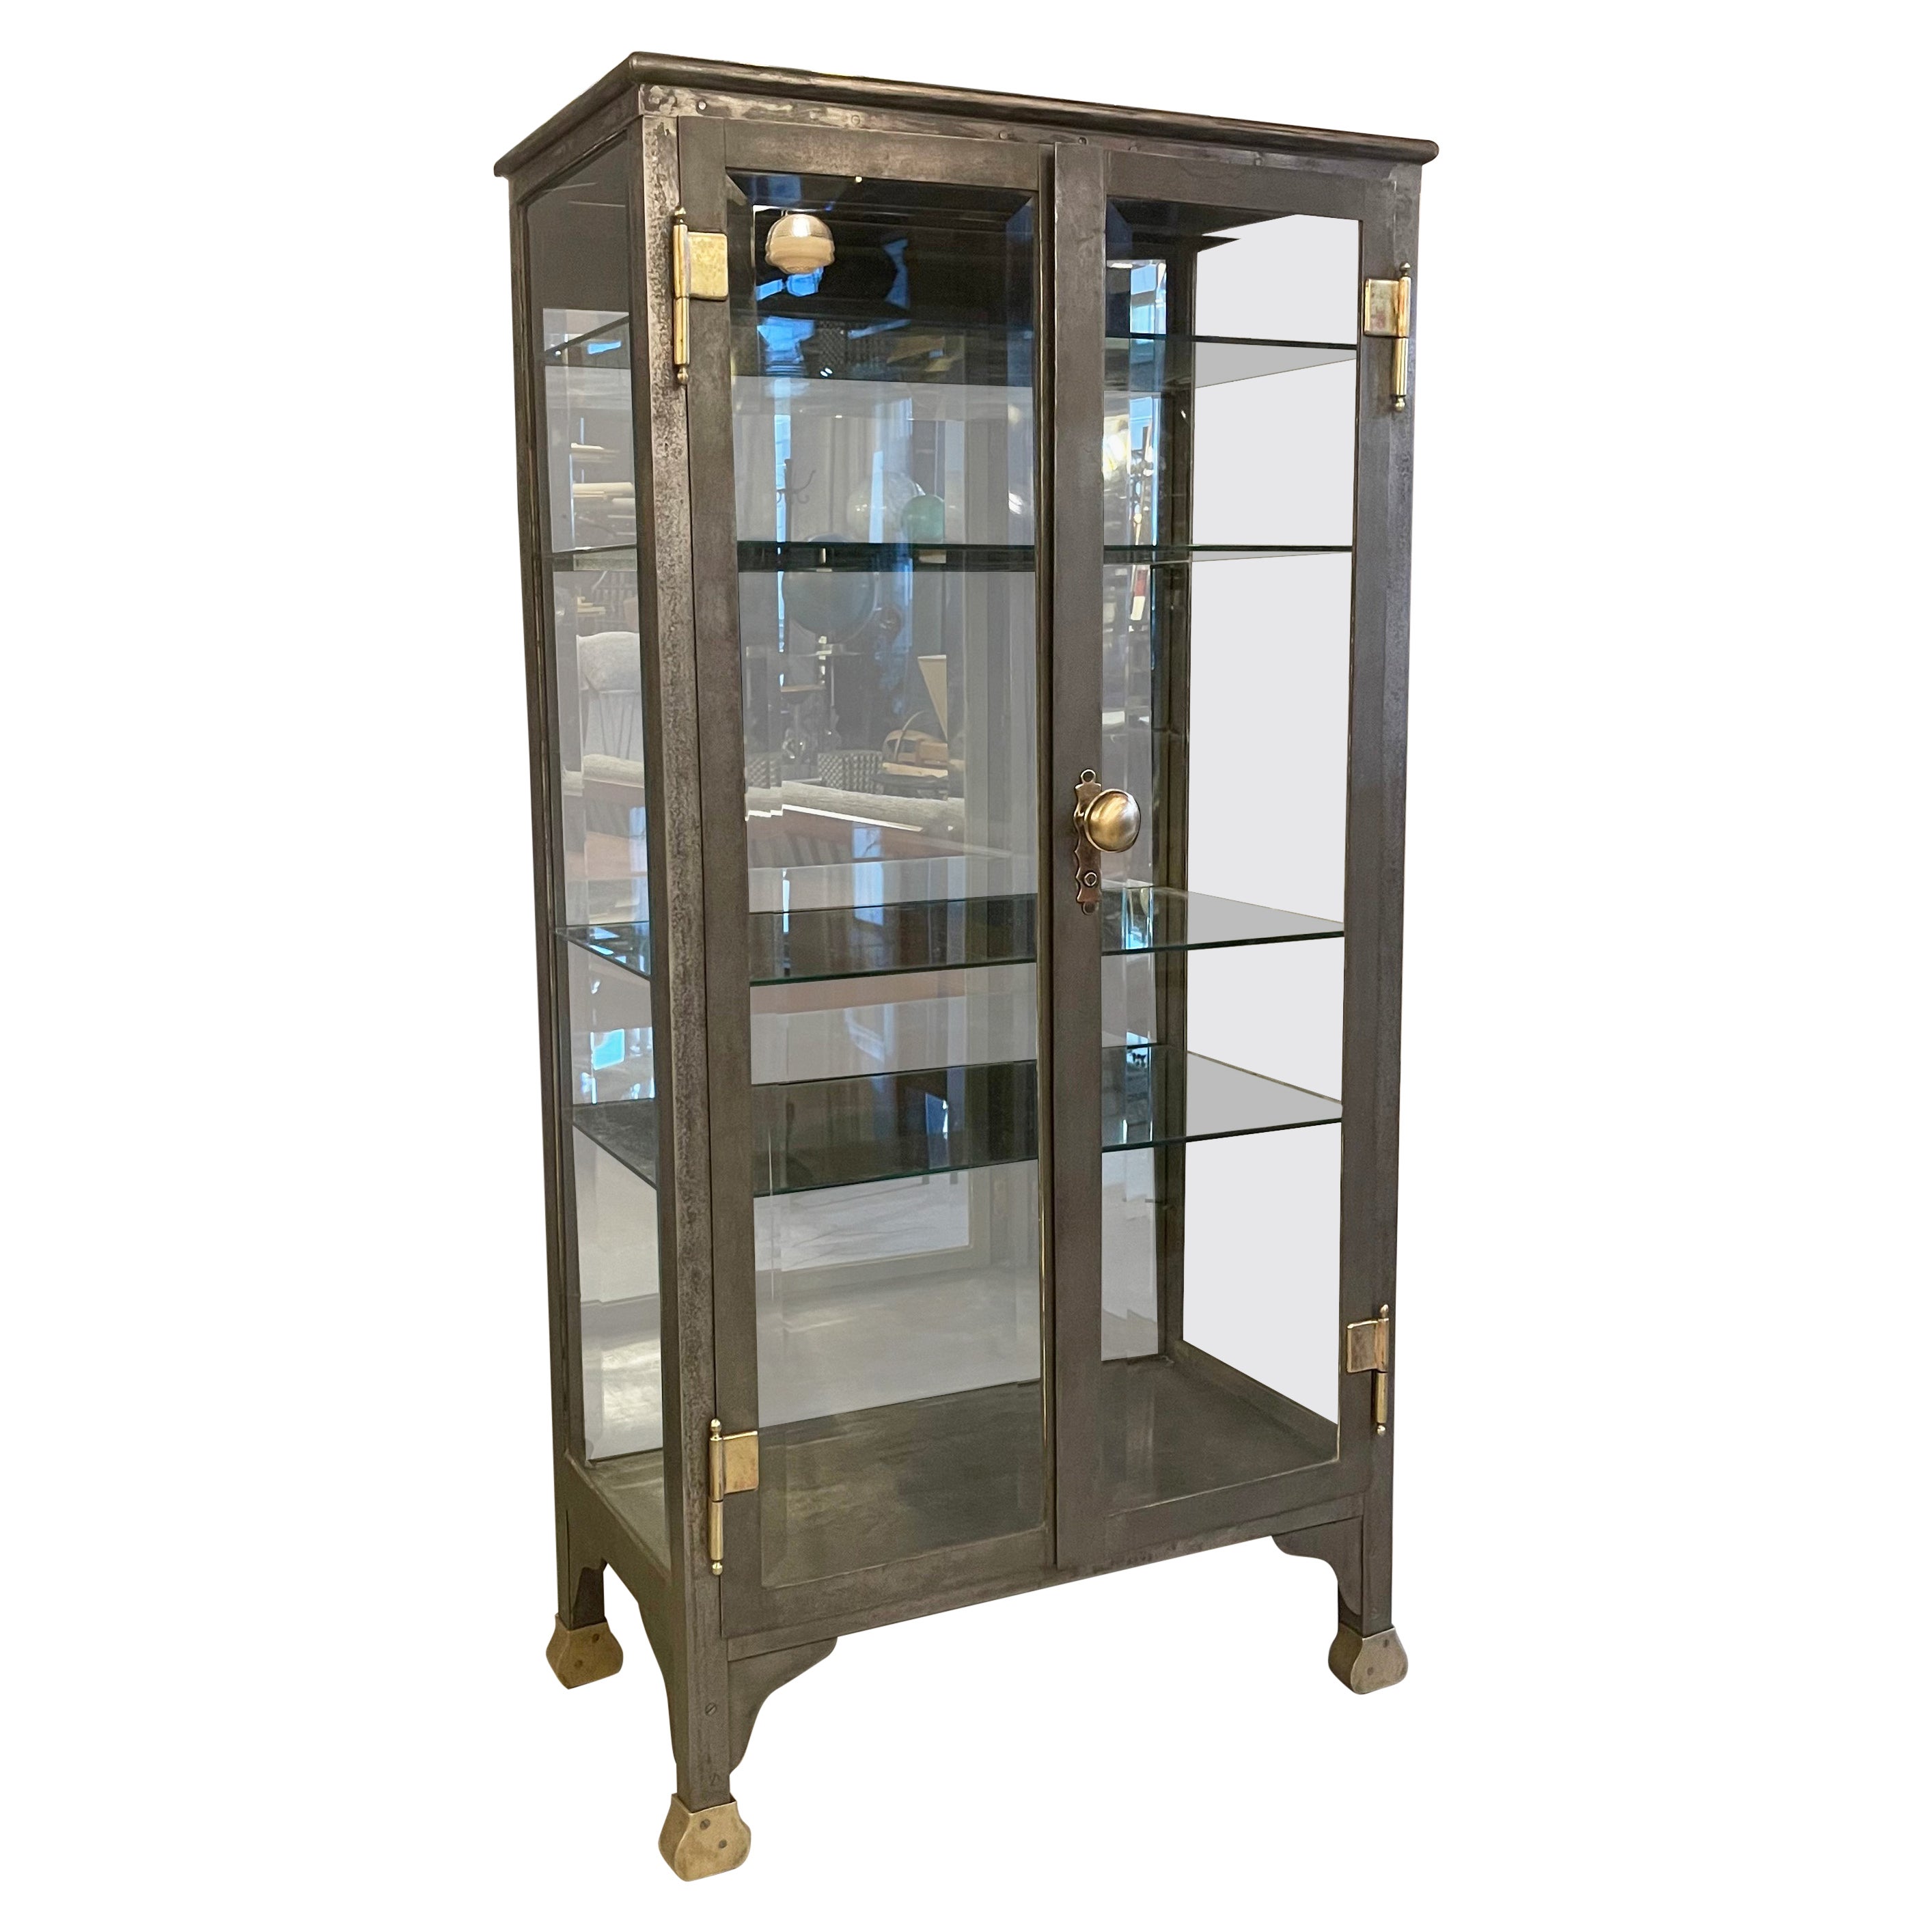 Antique Industrial Brushed Steel Double Door Apothecary Display Cabinet For Sale